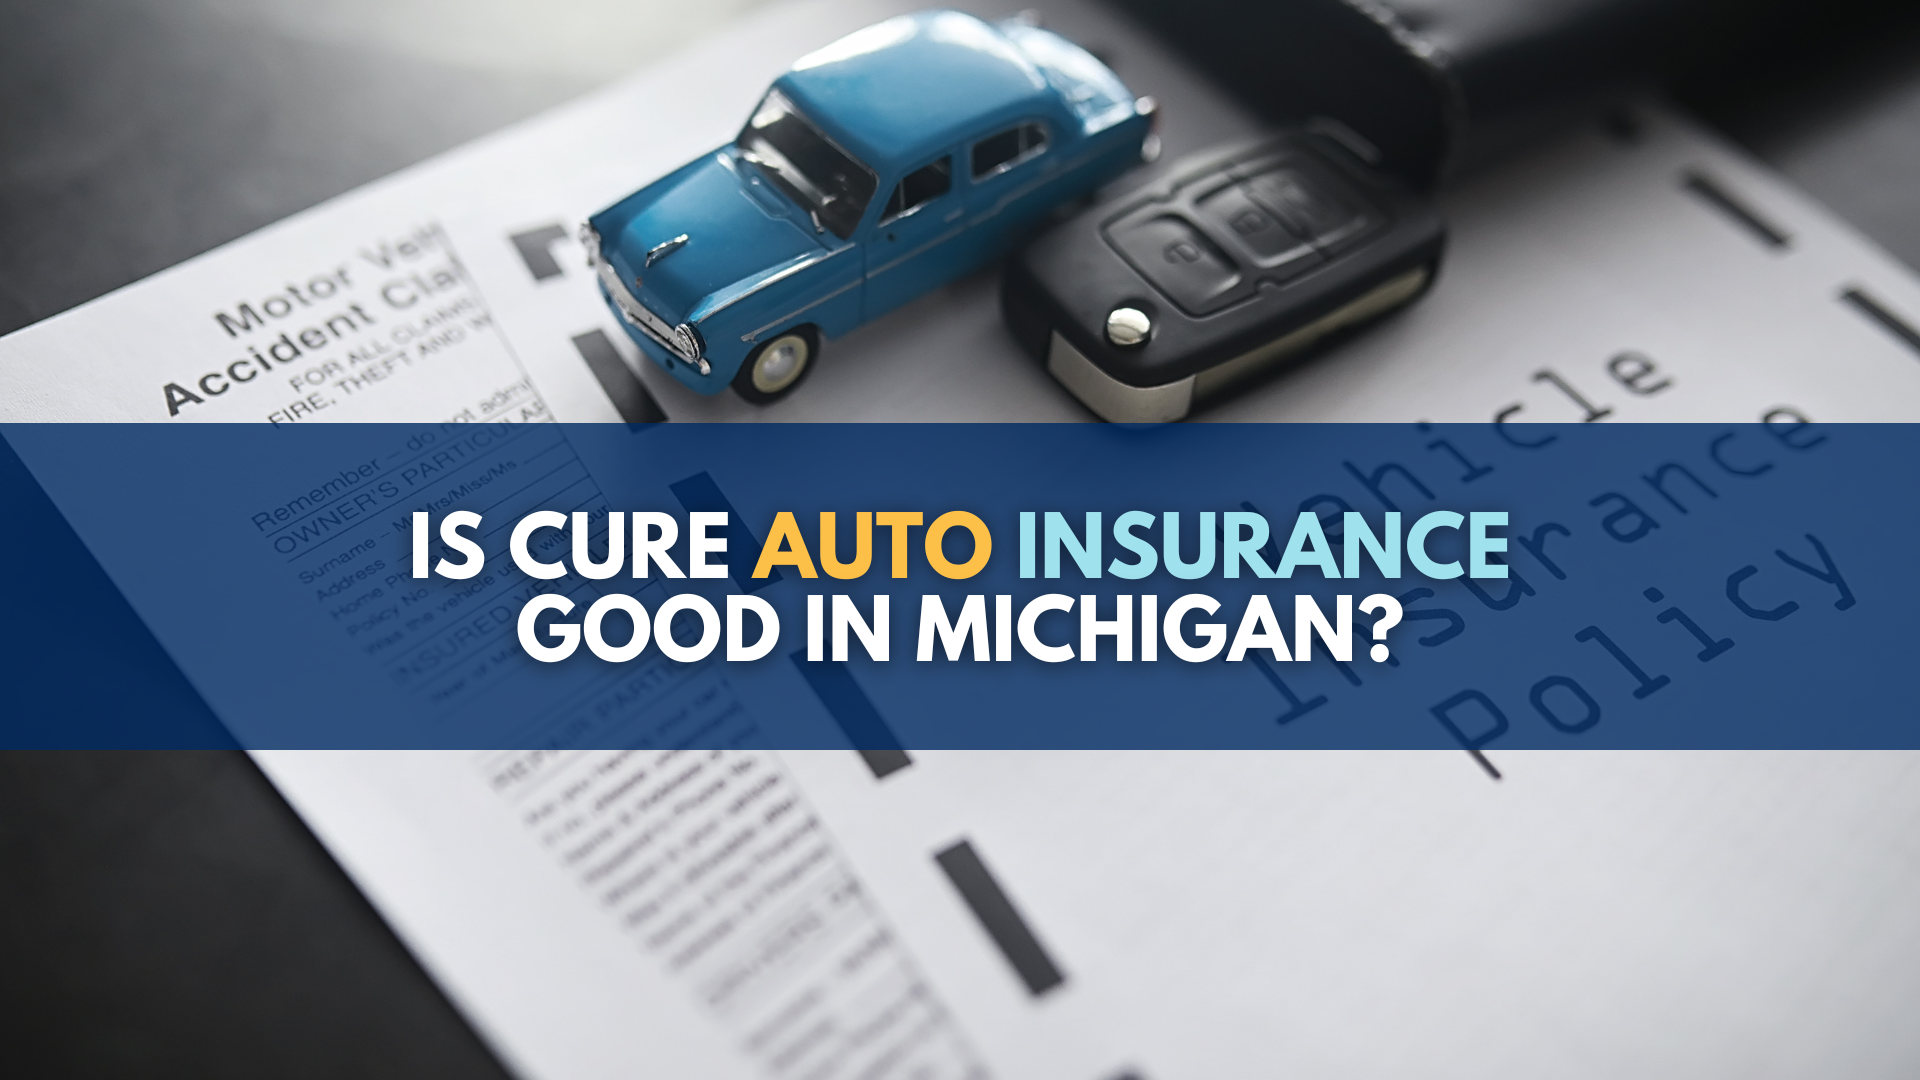 Is cure auto insurance good in Michigan?